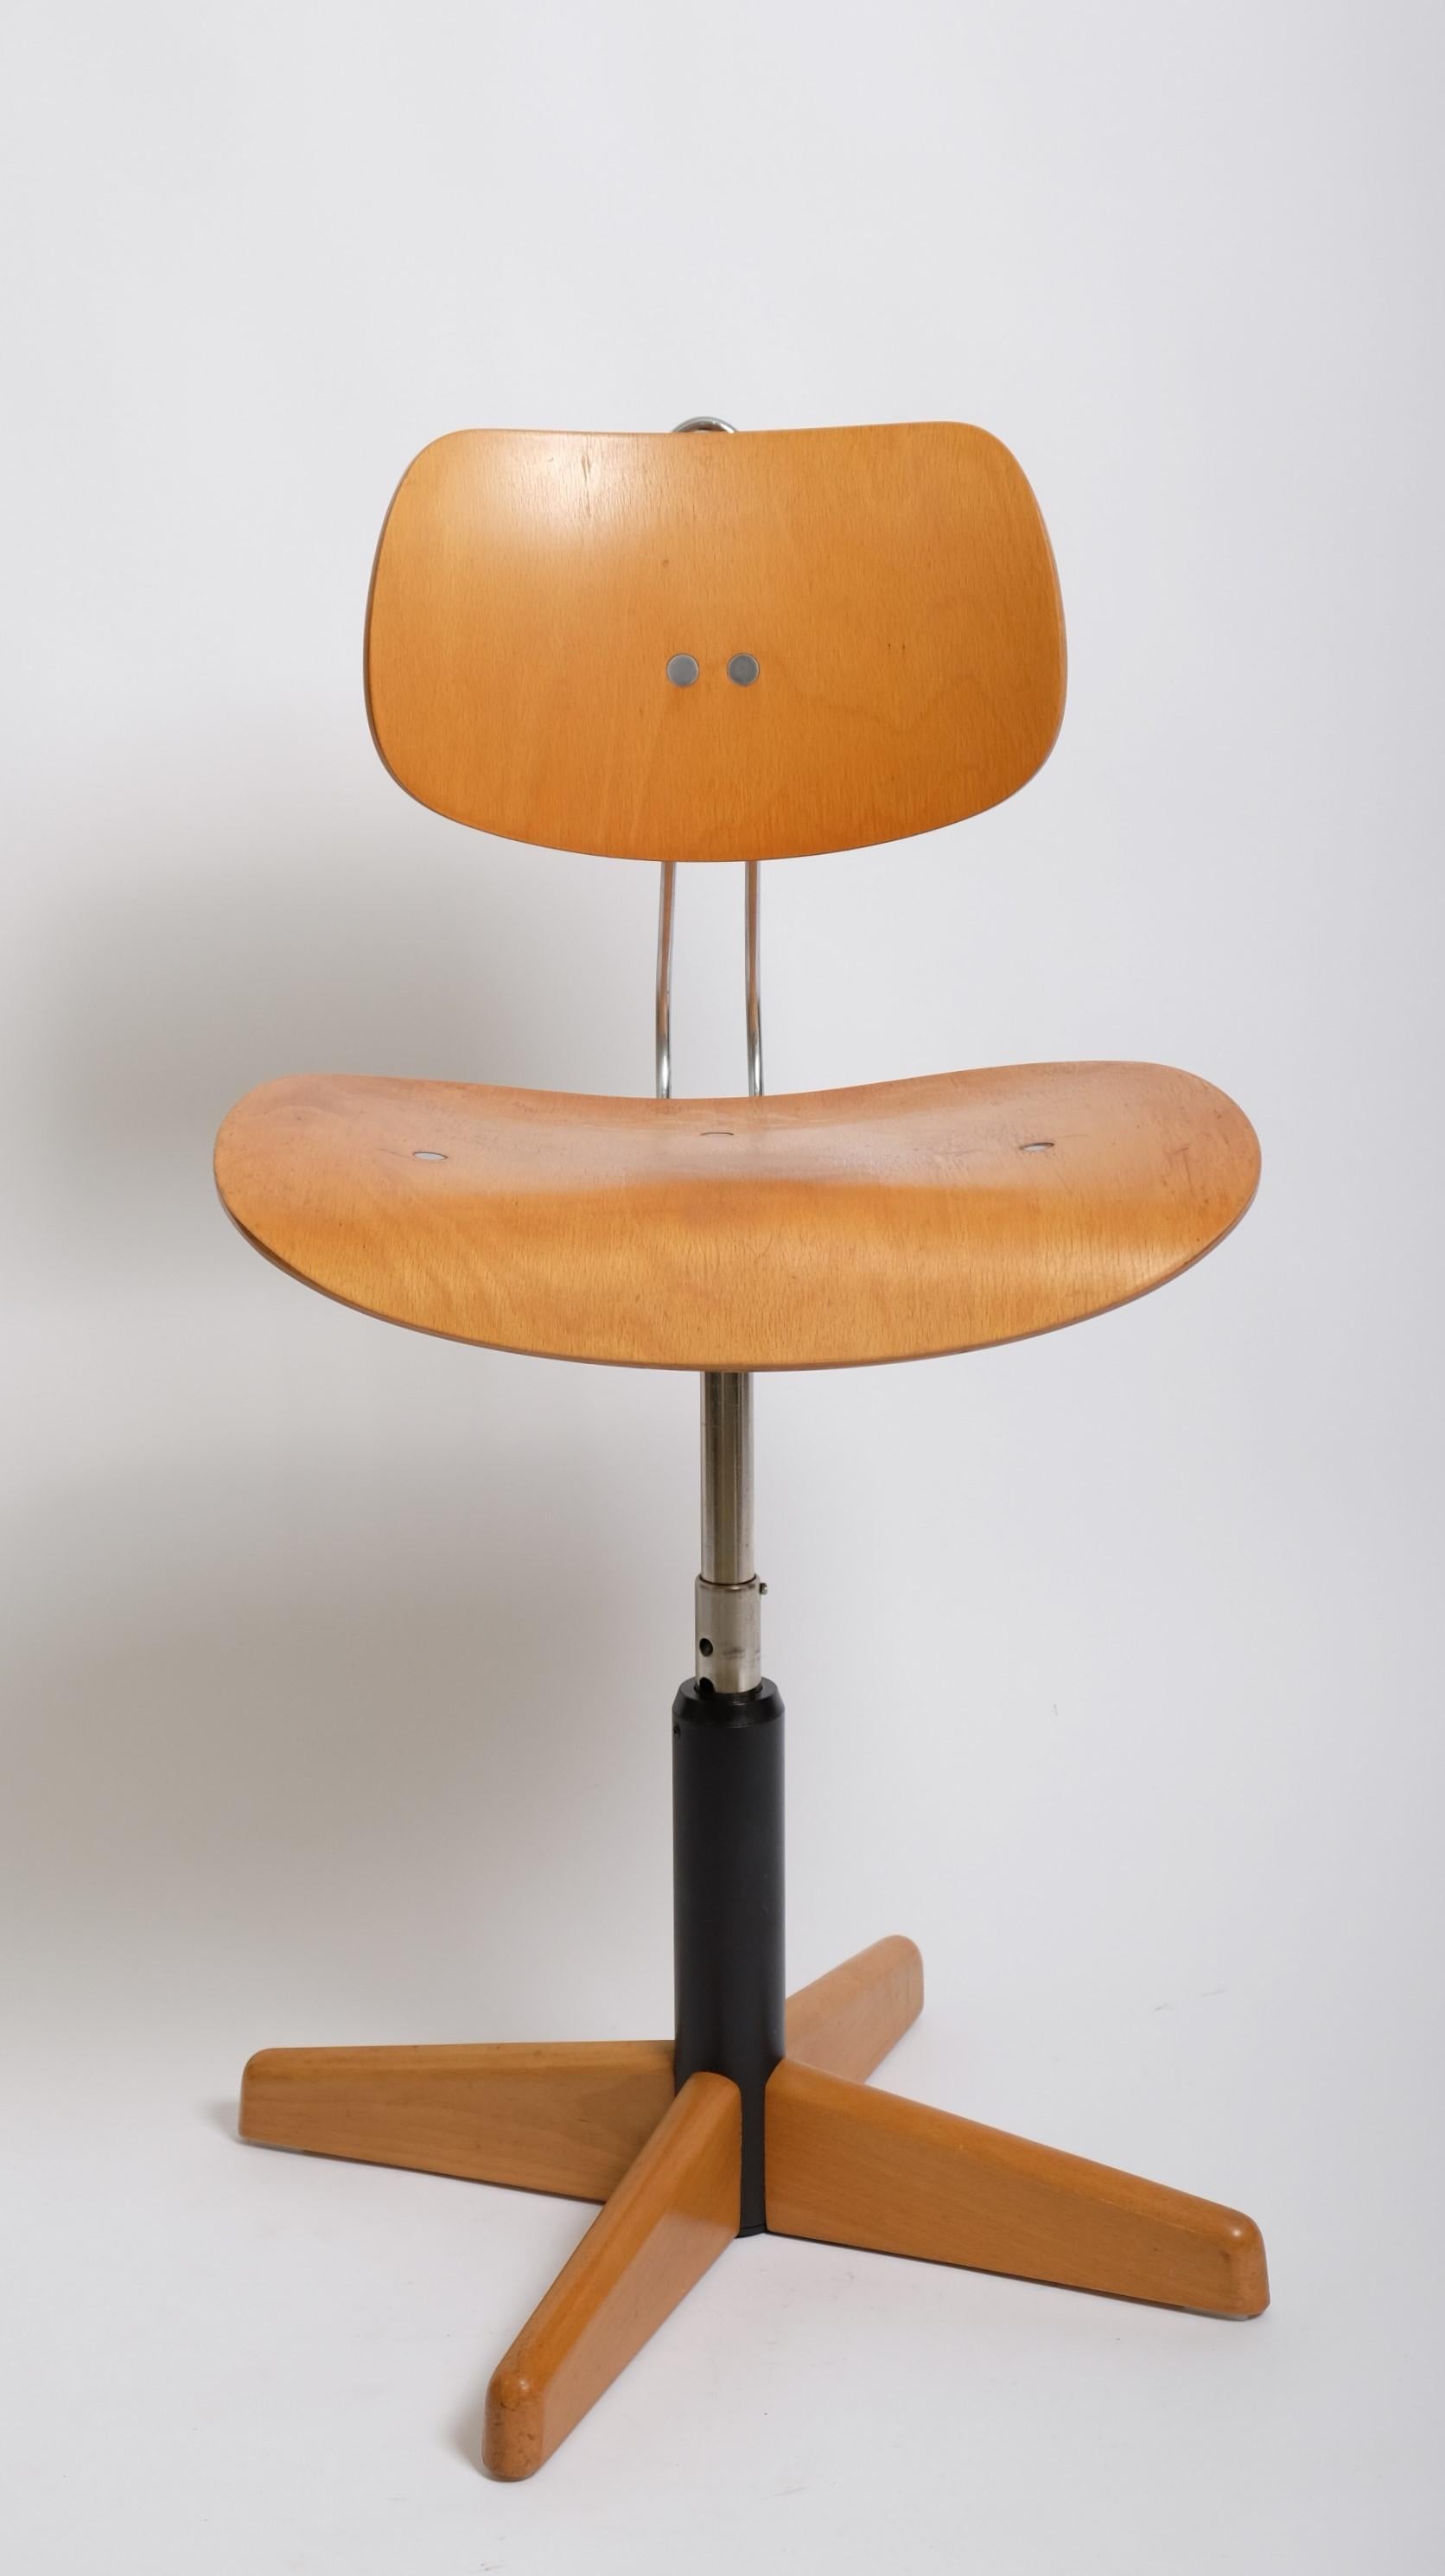 Spring swivel chair SE40 by Egon Eiermann for Wilde + Spieth, Germany 1950s.

Description
- Original W + S, presumably made in the 1950-60s
- Seat and back made of multi-glued beech plywood
- rotatable and height adjustable
- Springy seat and